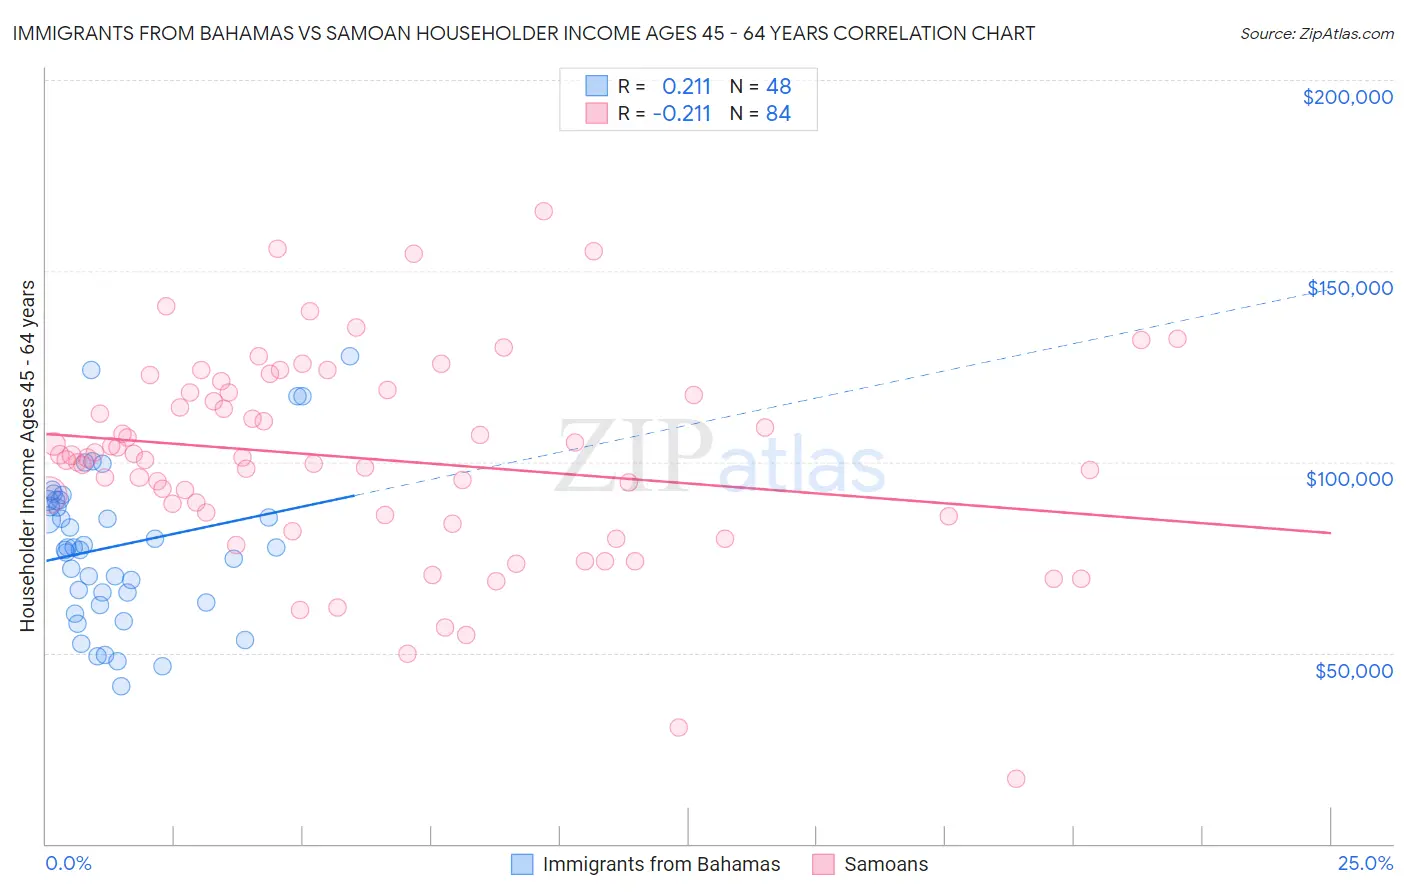 Immigrants from Bahamas vs Samoan Householder Income Ages 45 - 64 years